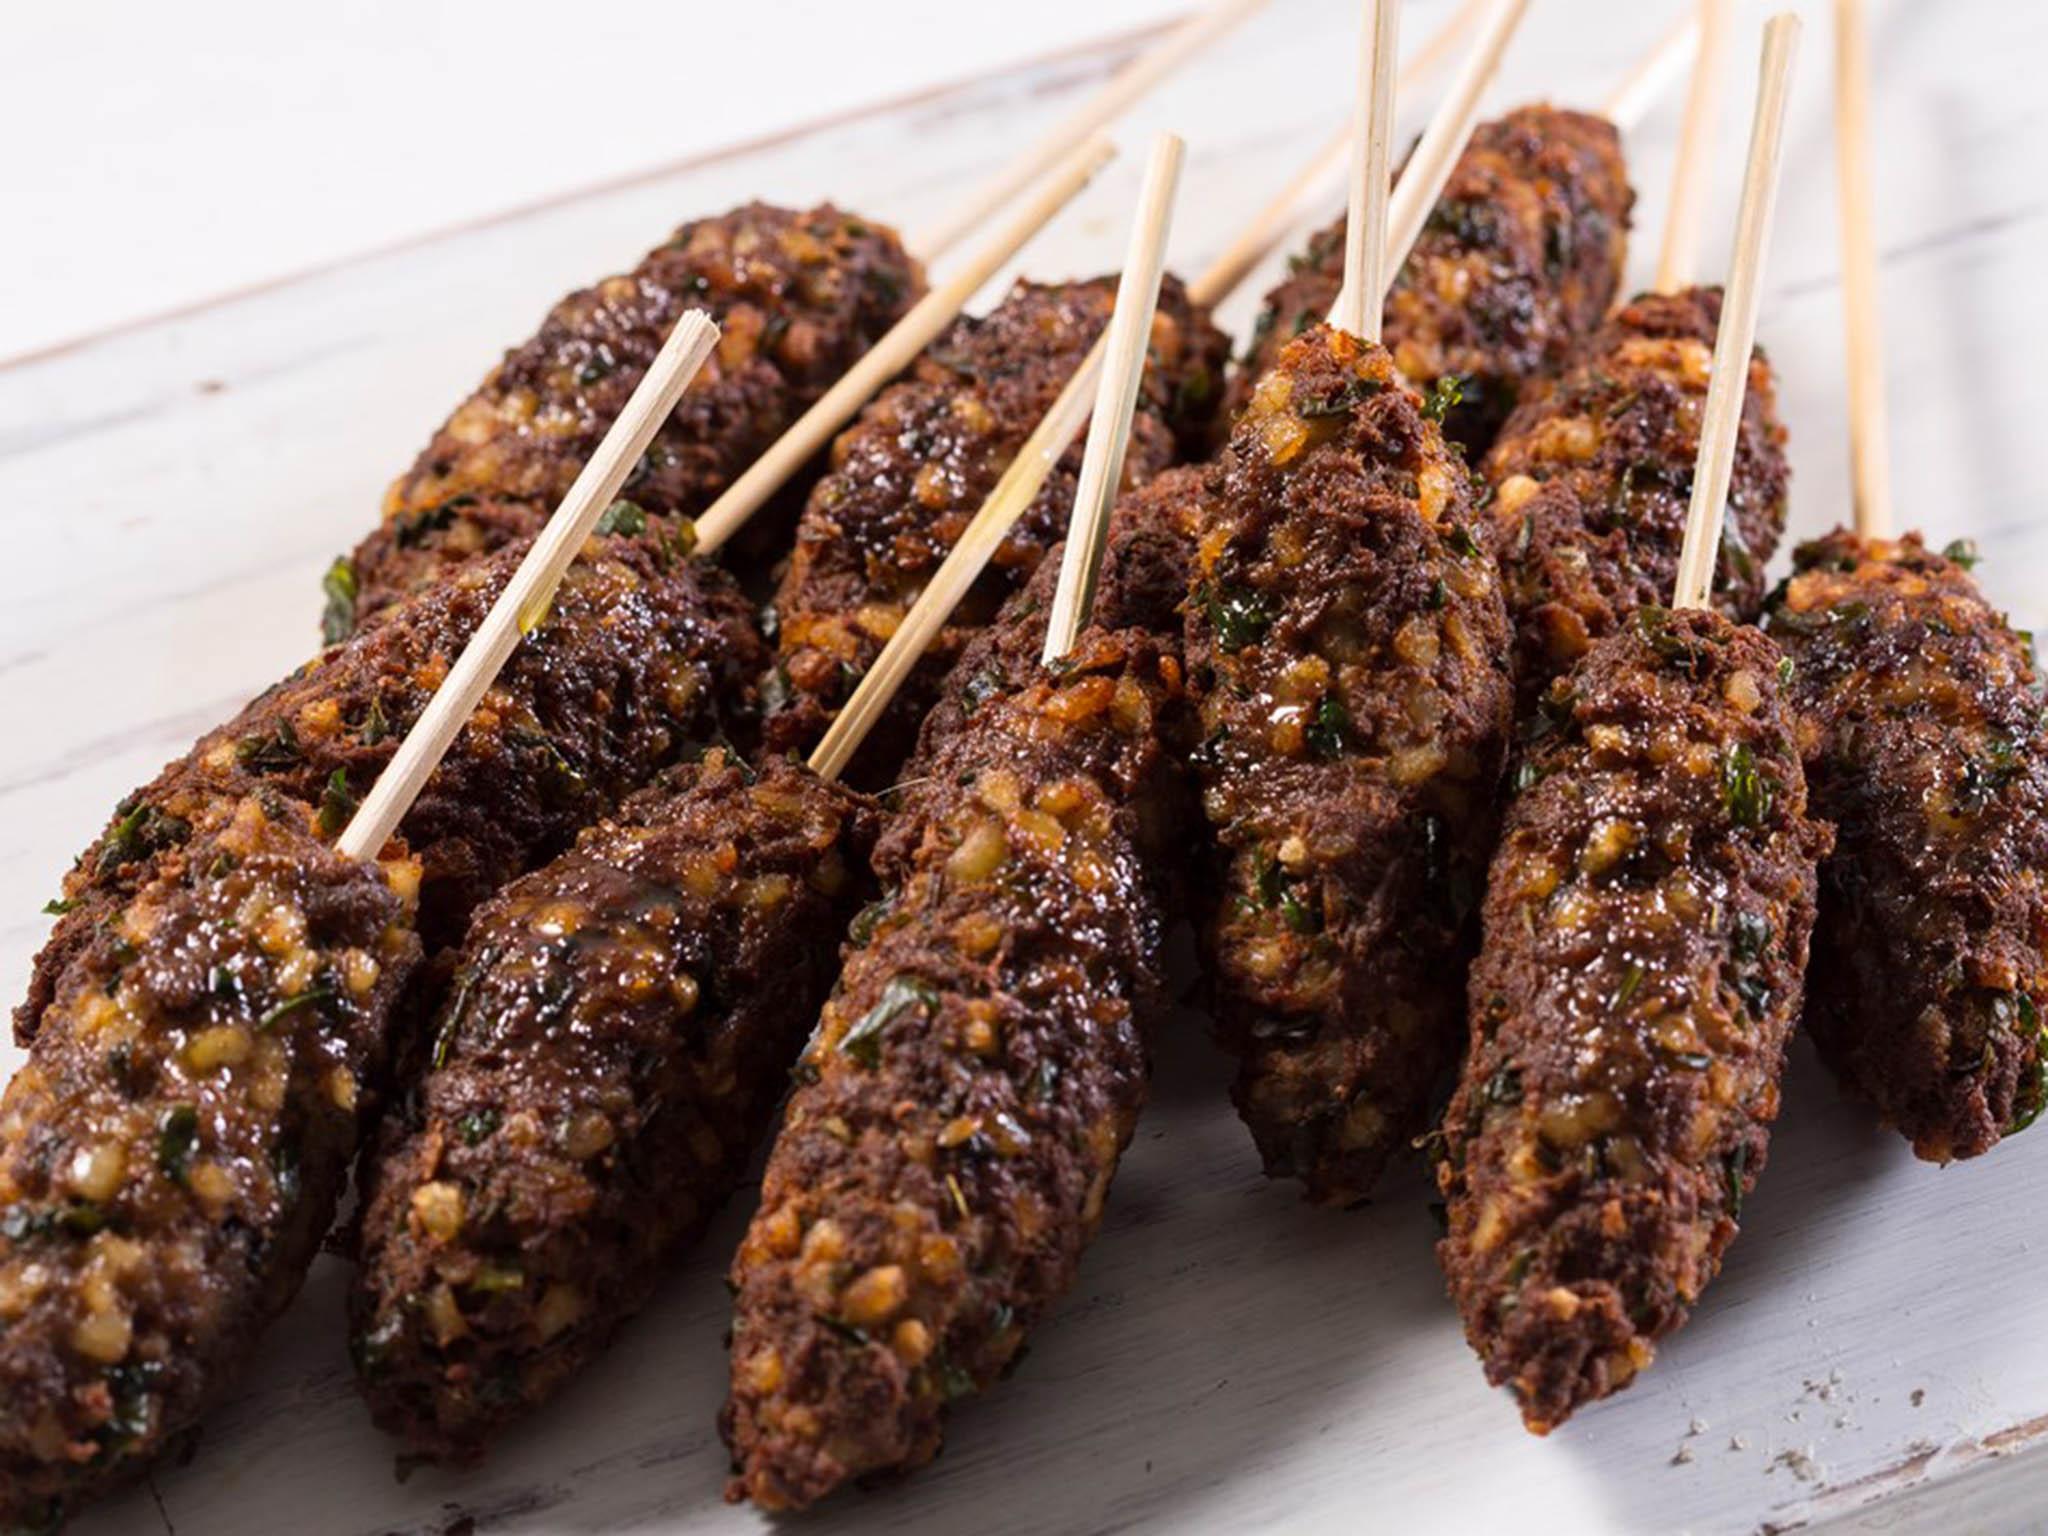 The Lebanon inspired Kibe are made from minced beef or lamb